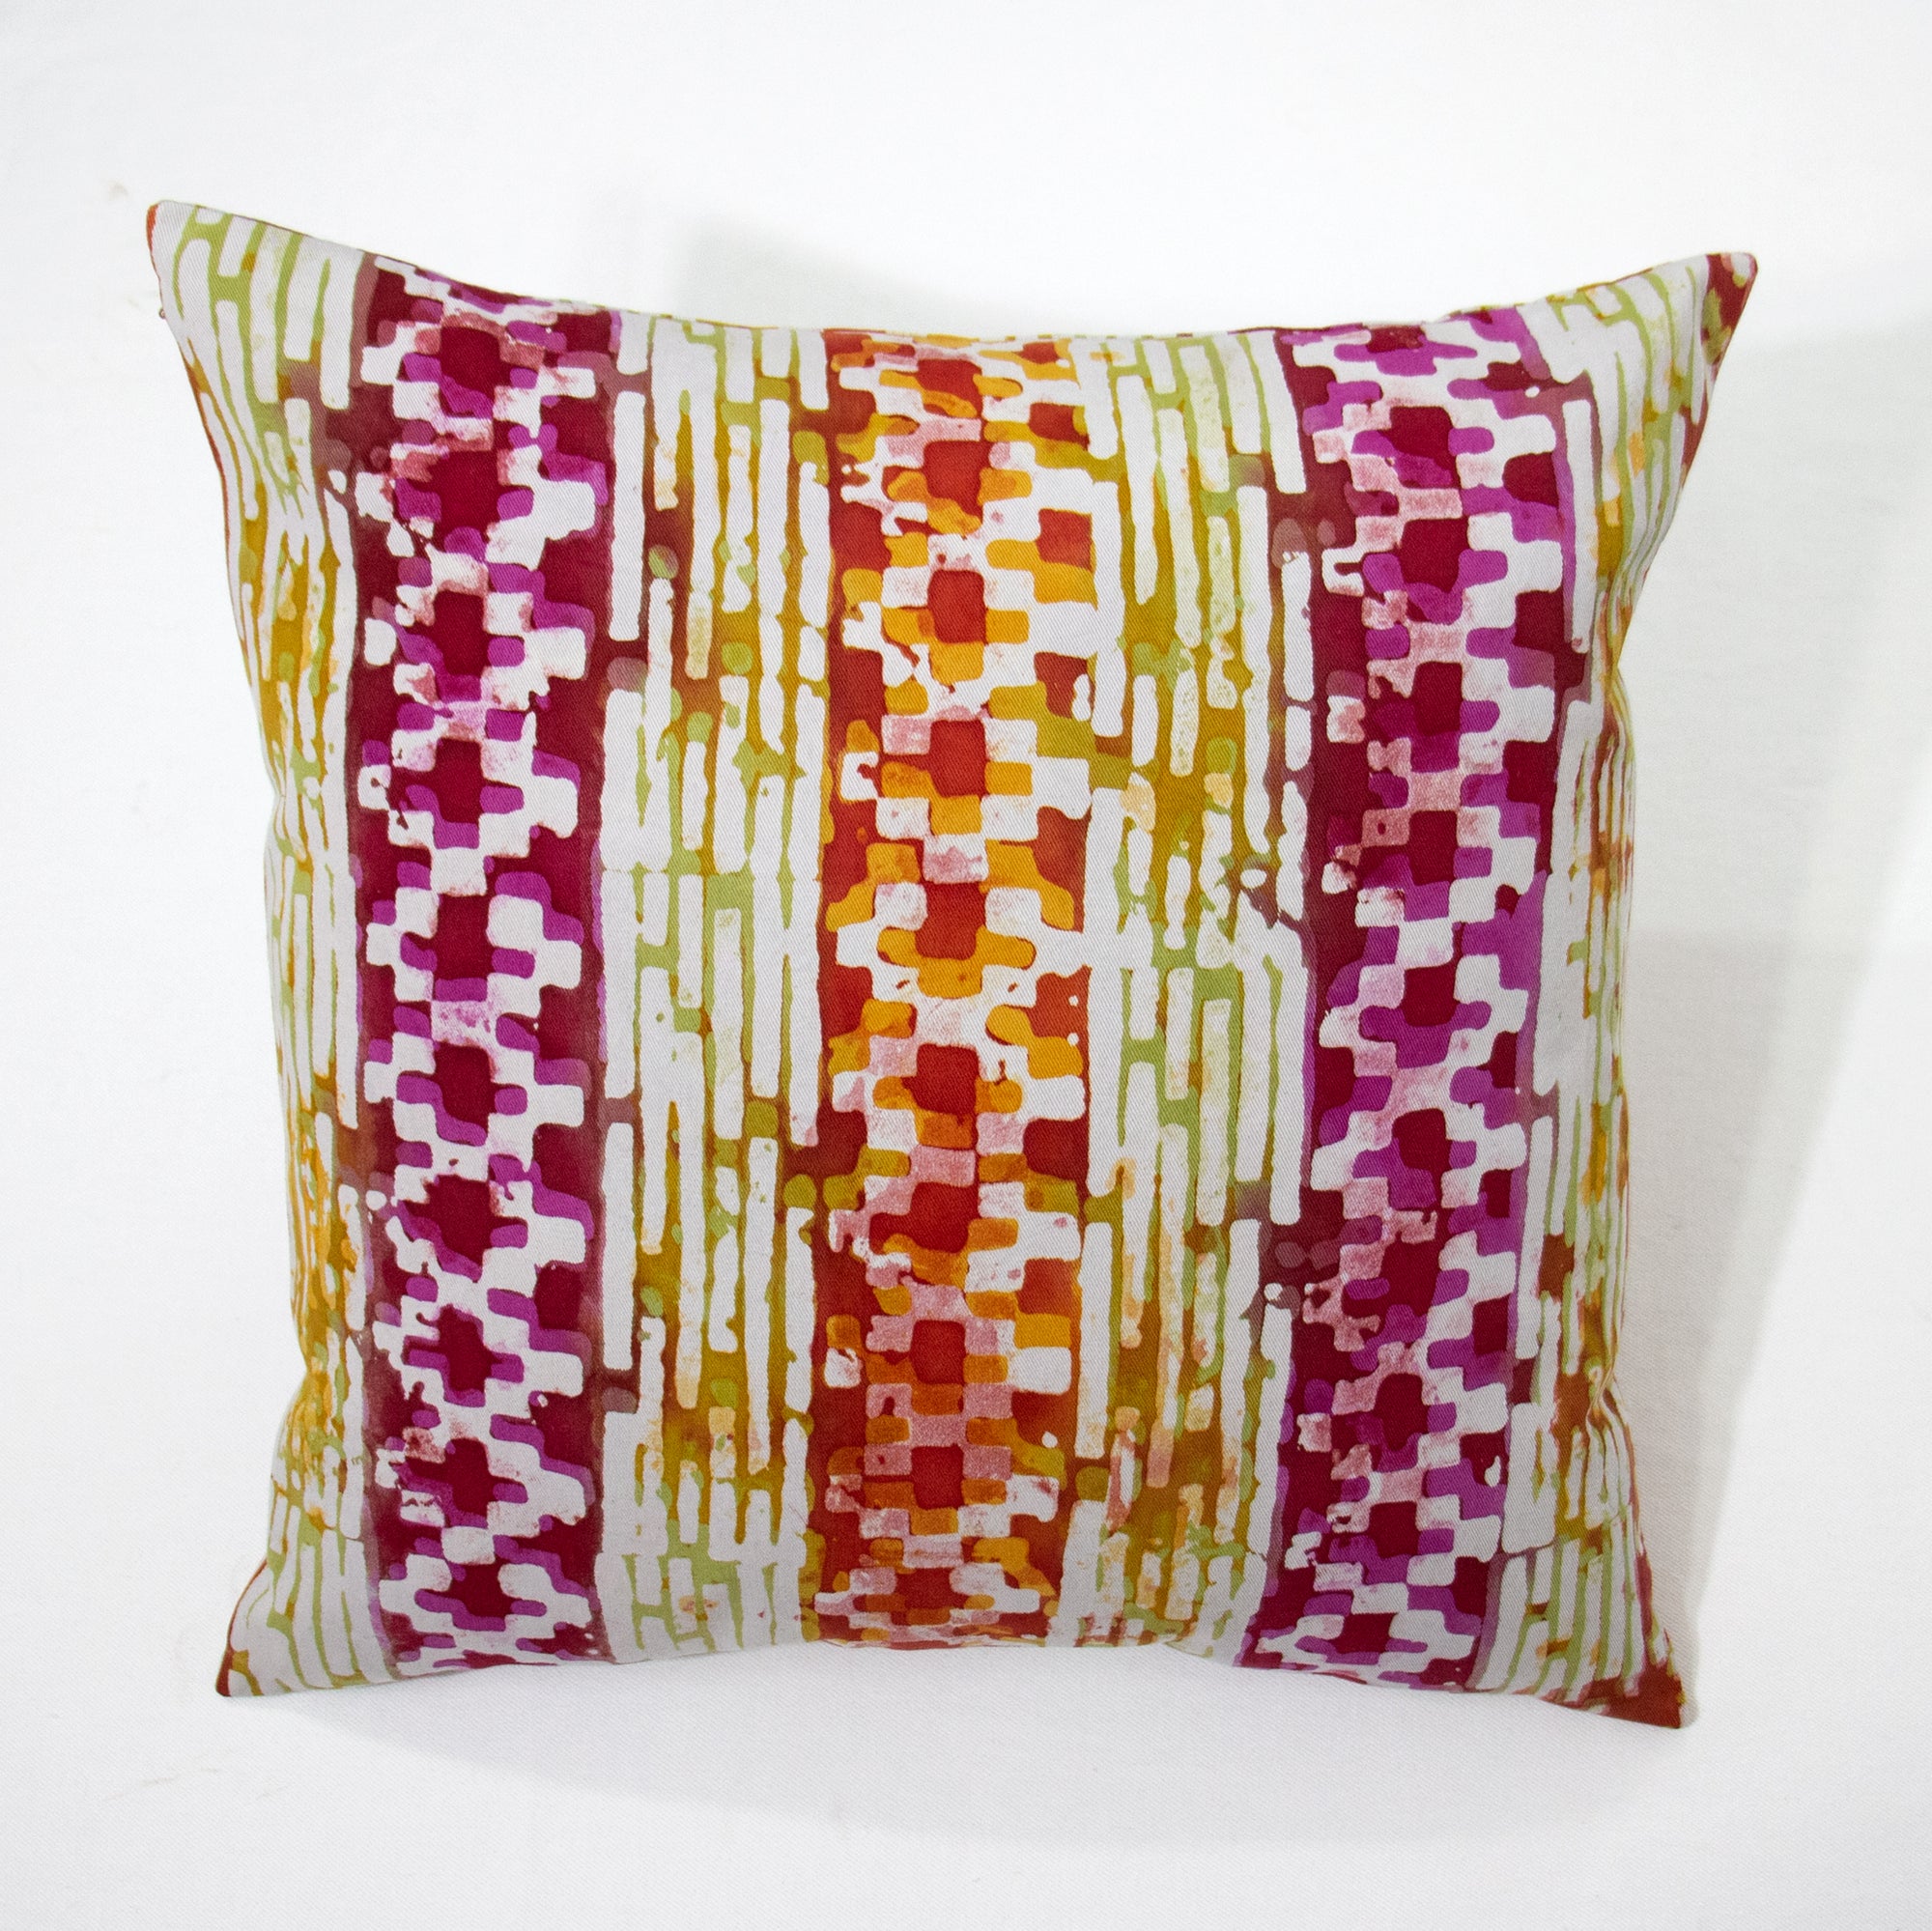 Hand Painted Accent Pillow Cover - Simone